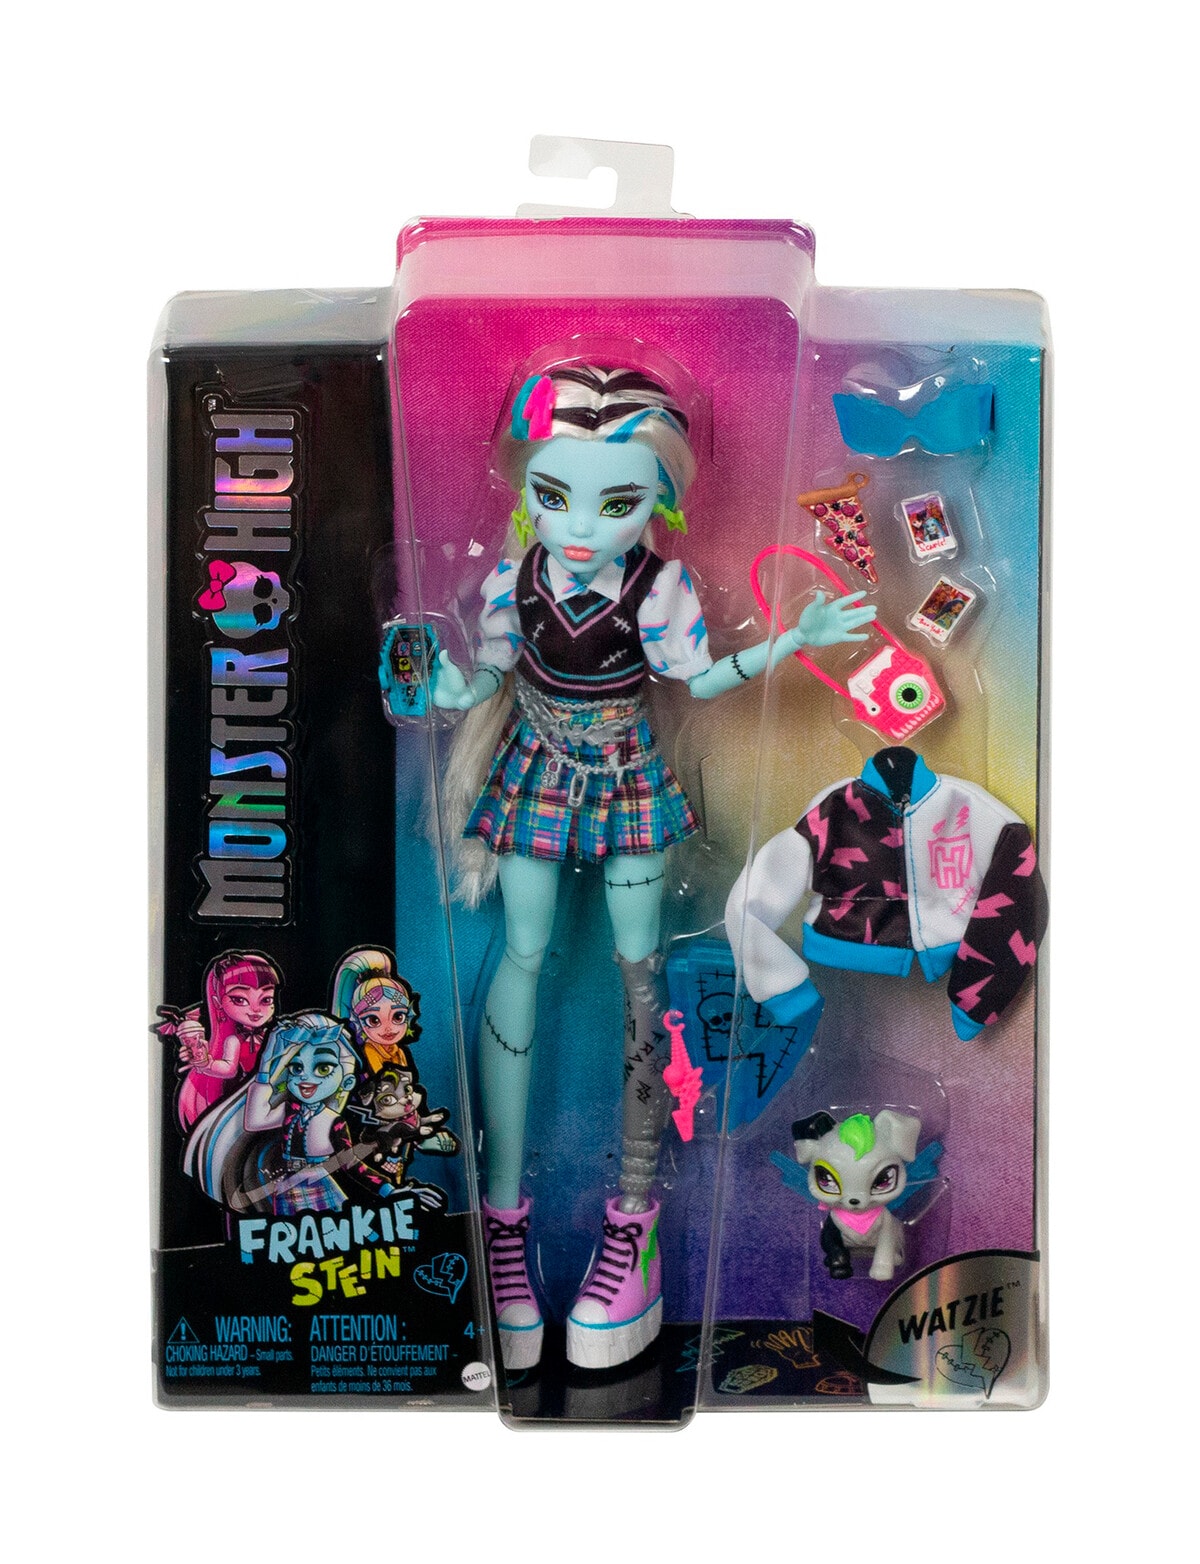 don landise recommends Pictures Of Monster High Frankie